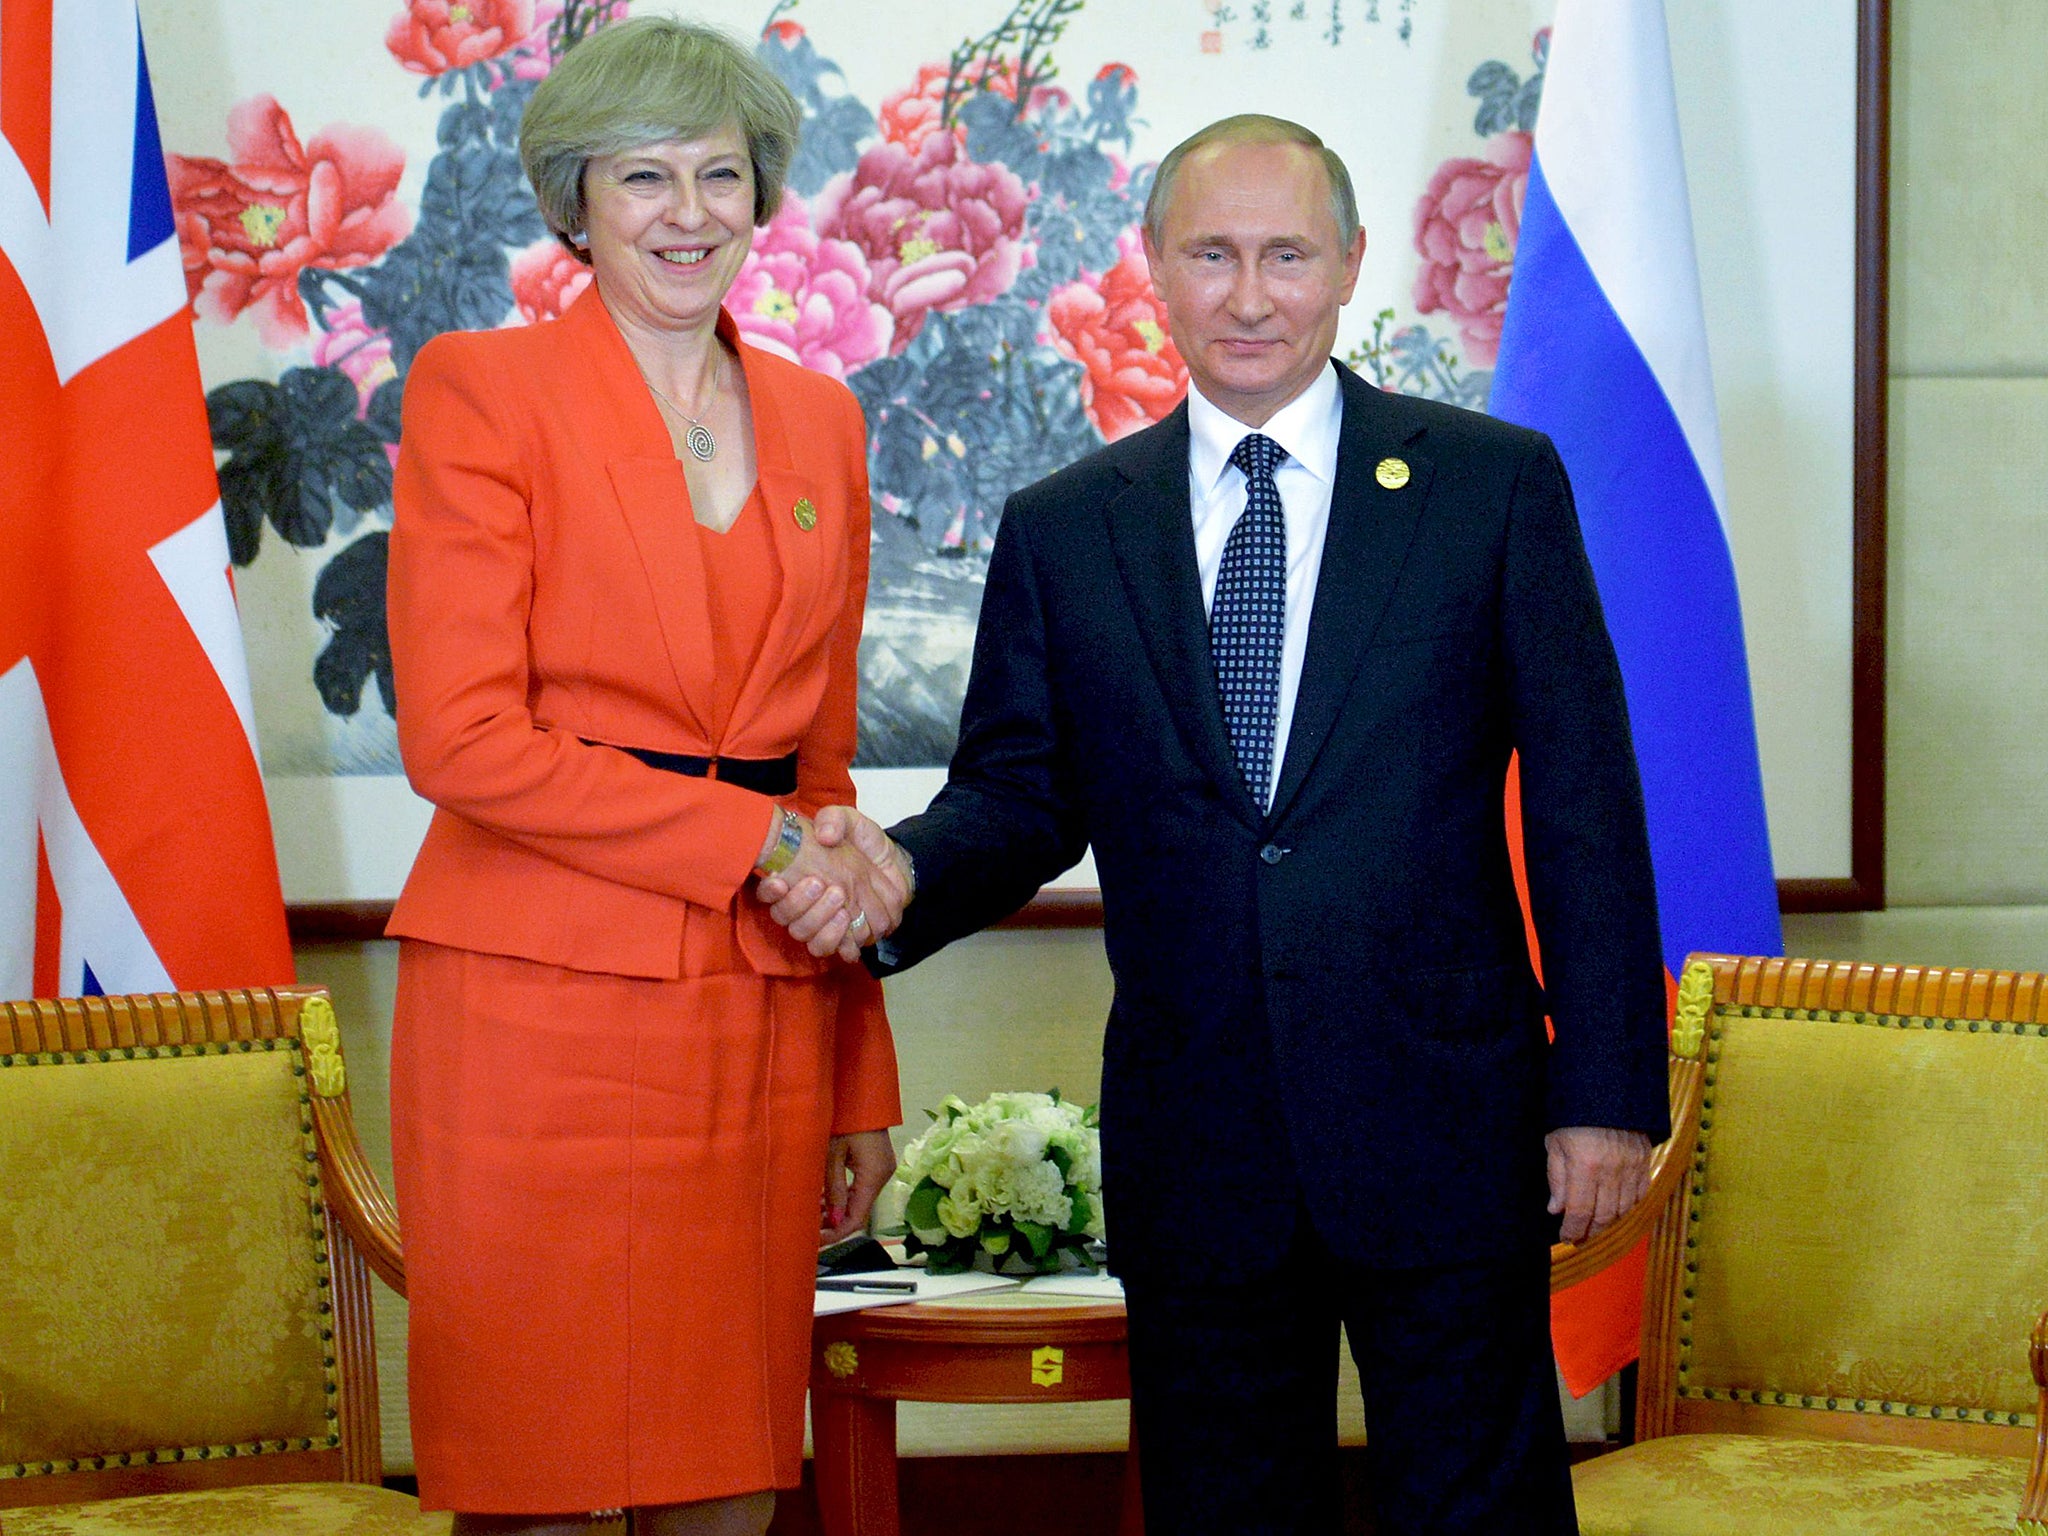 Mr Putin with Mrs May on the sidelines of the G20 Leaders Summit in Hangzhou on September 4, 2016